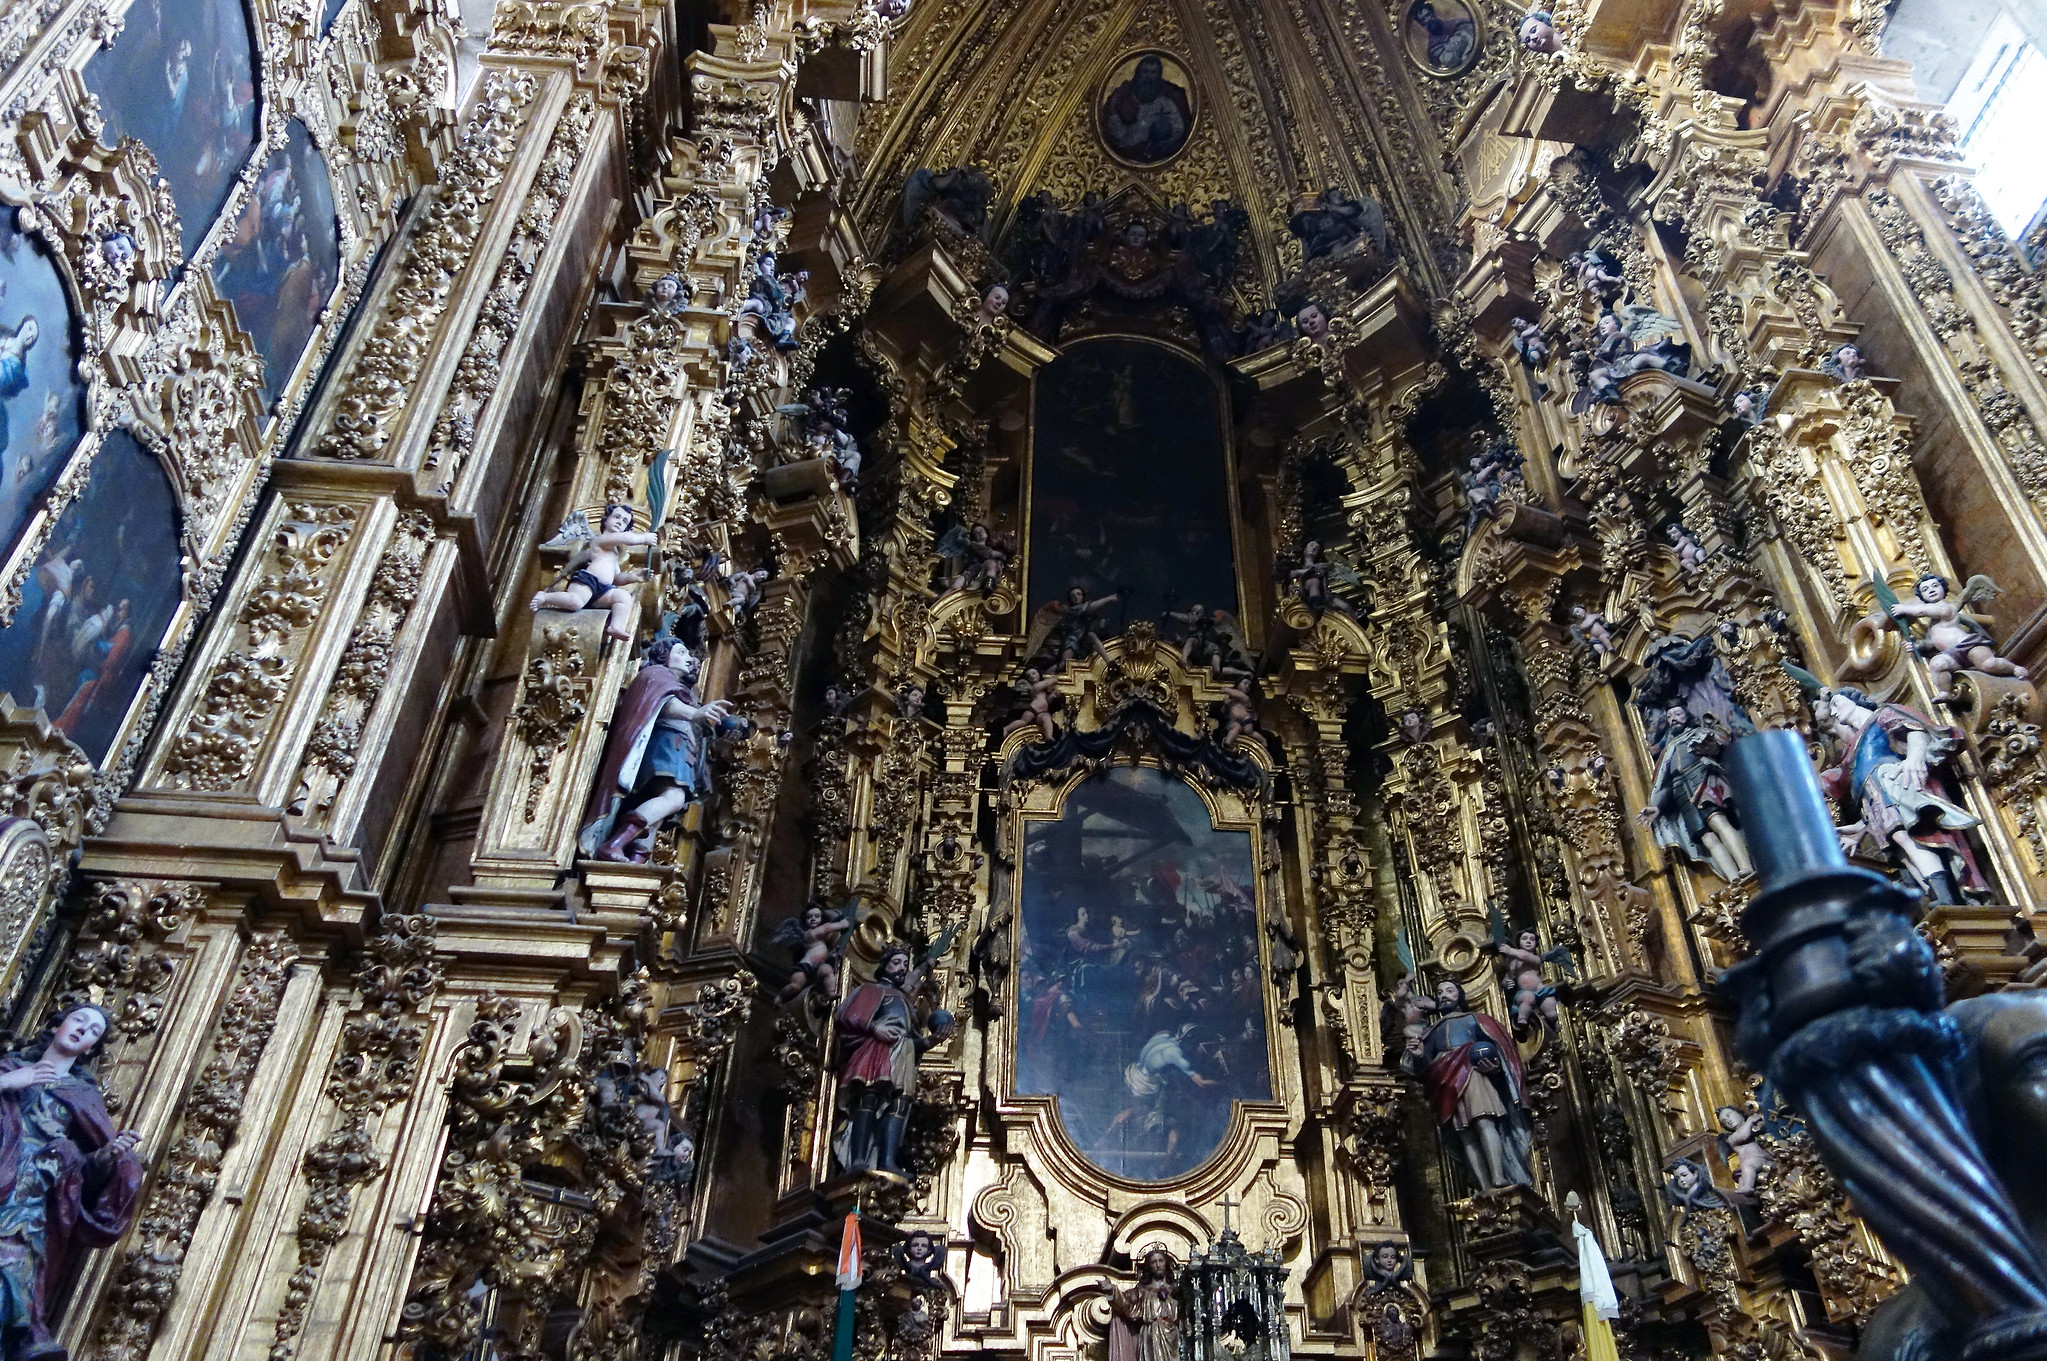 Jerónimo de Balbás, Altar of the Kings (Altar de los Reyes), 1718-37, Metropolitan Cathedral of the Assumption of the Most Blessed Virgin Mary (Mexico City)